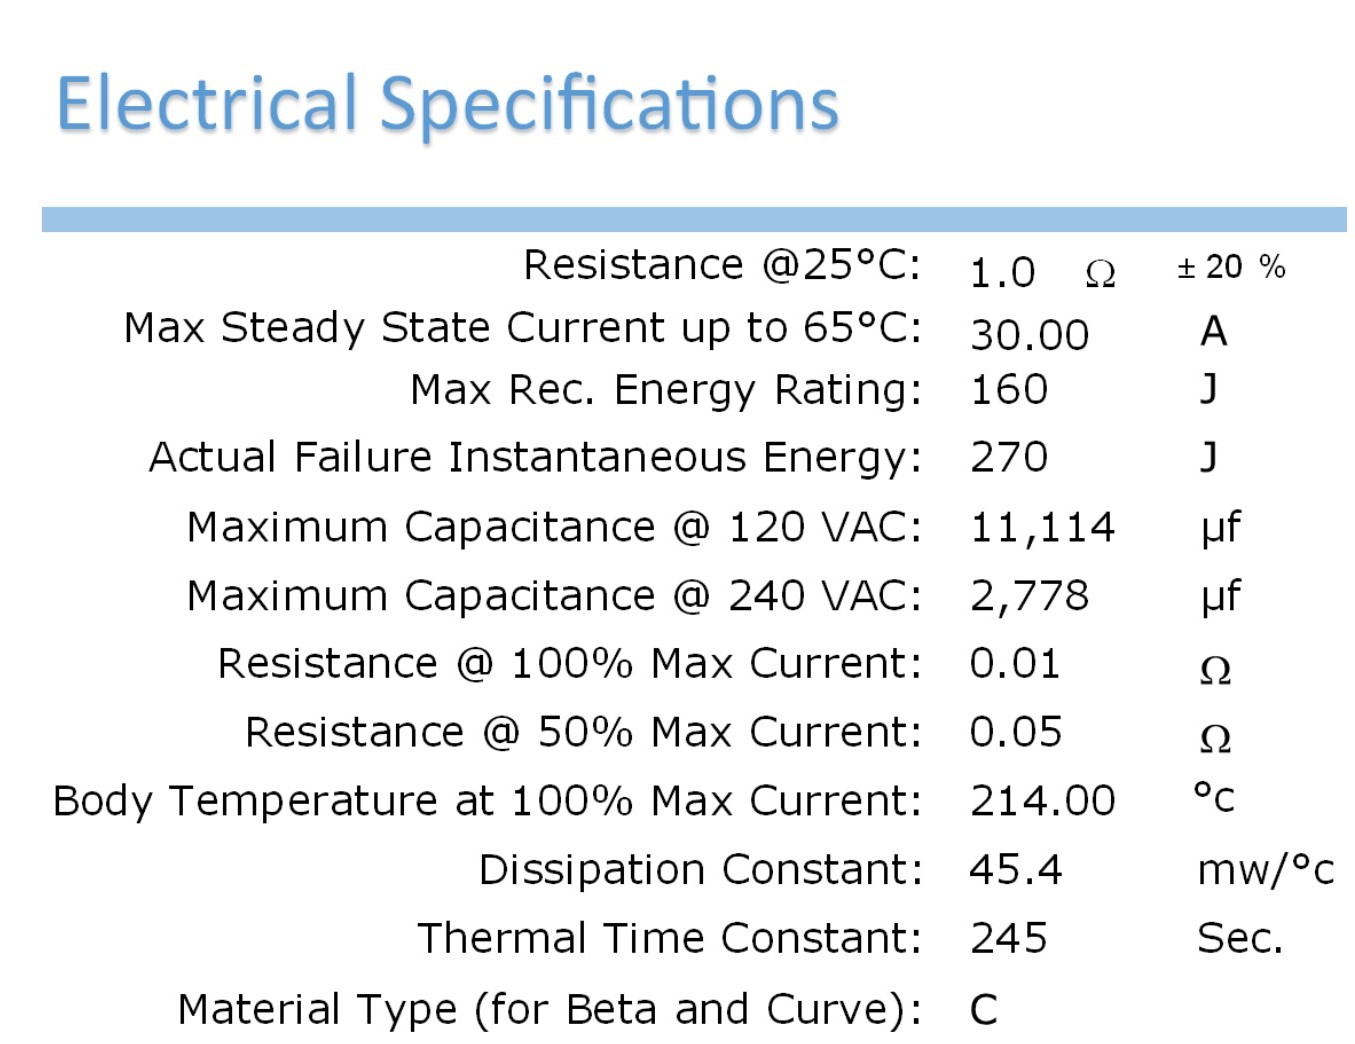 Electrical specifications for inrush current limiters